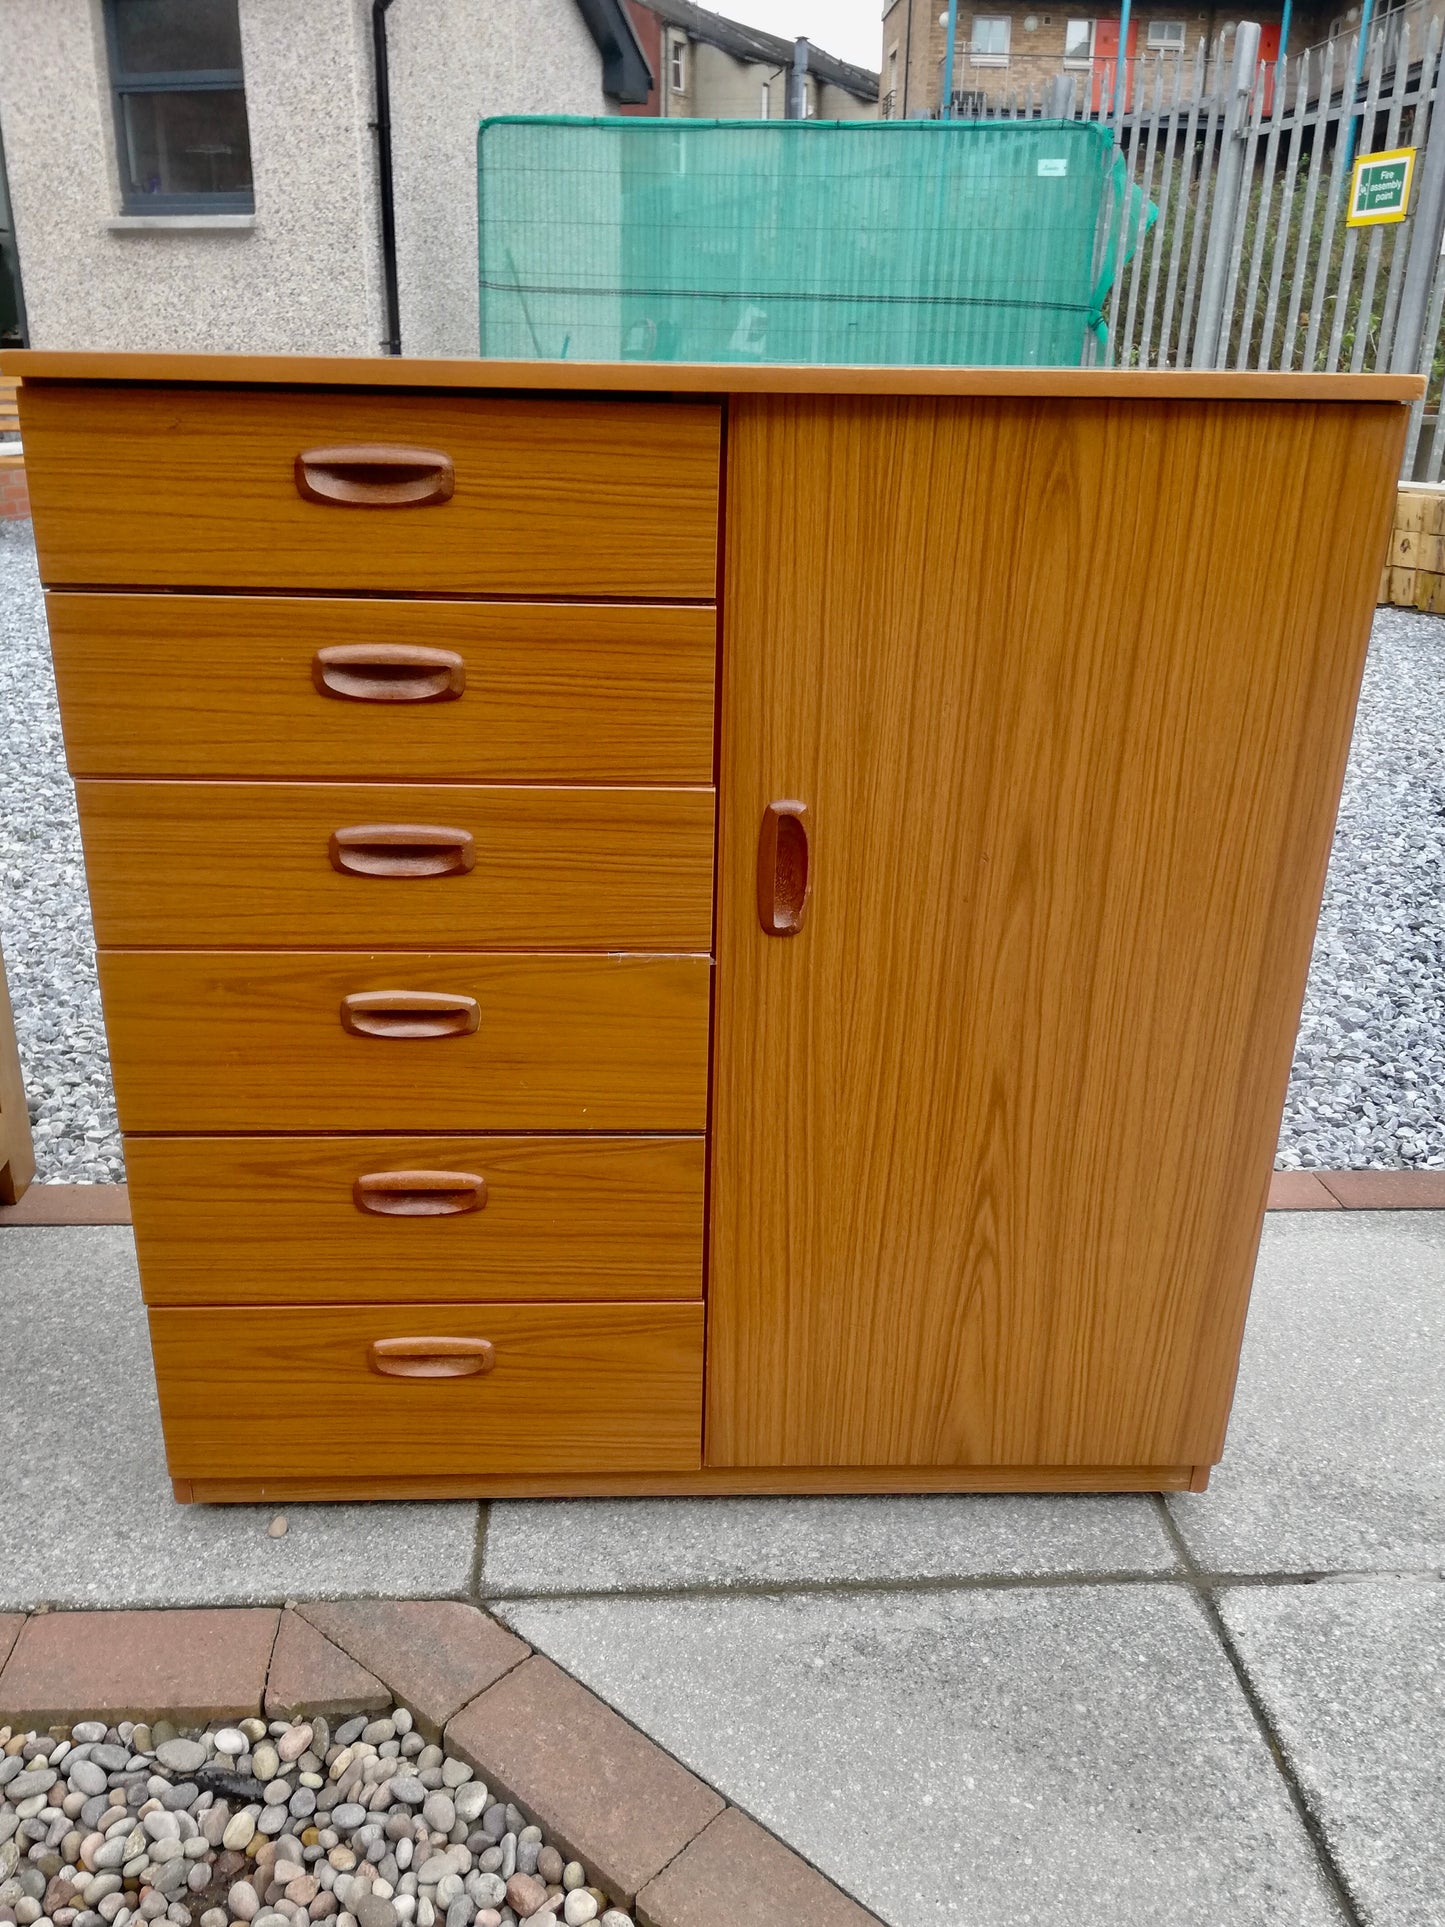 Vintage Mid Century Cabinet available for painting - price includes painting